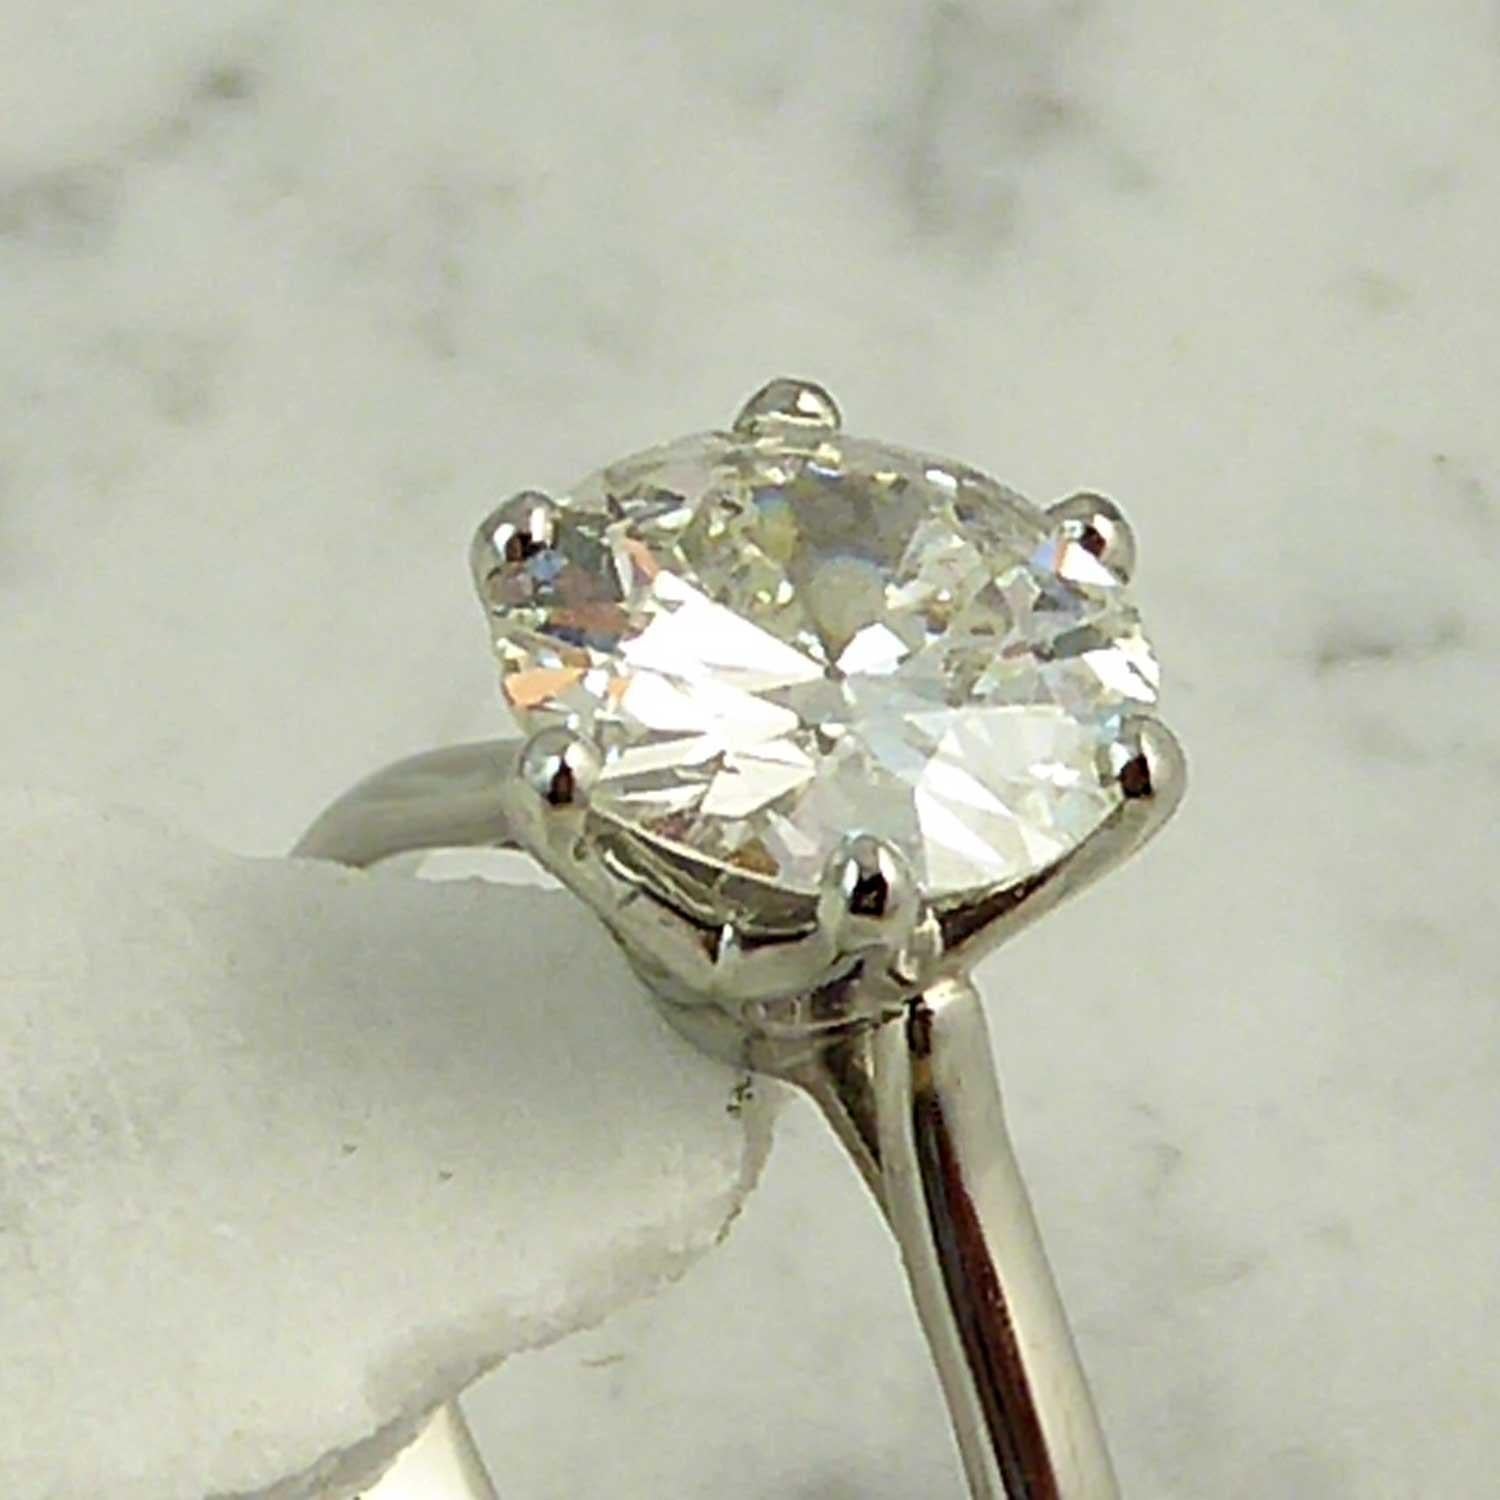 A stunning solitaire diamond ring, 2.02ct, of early round brilliant cut, which has been remounted into a platinum ring in our own workshops (sometimes, old rings have just been loved too much for resale, although the diamond remains as old and